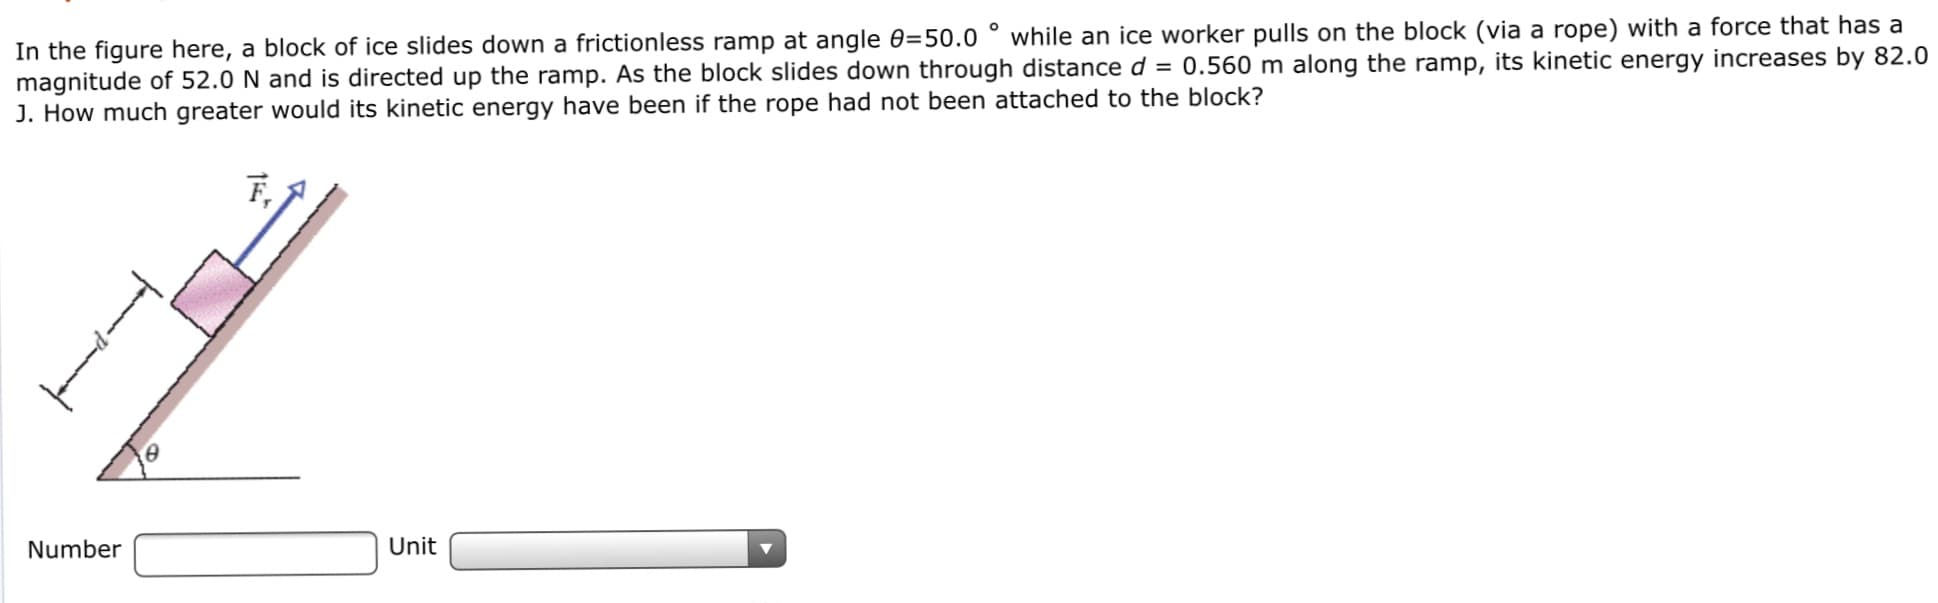 In the figure here, a block of ice slides down a frictionless ramp at angle 0=50.0 ° while an ice worker pulls on the block (via a rope) with a force that has a
magnitude of 52.0 N and is directed up the ramp. As the block slides down through distance d = 0.560 m along the ramp, its kinetic energy increases by 82.0
J. How much greater would its kinetic energy have been if the rope had not been attached to the block?
F,
Number
Unit
